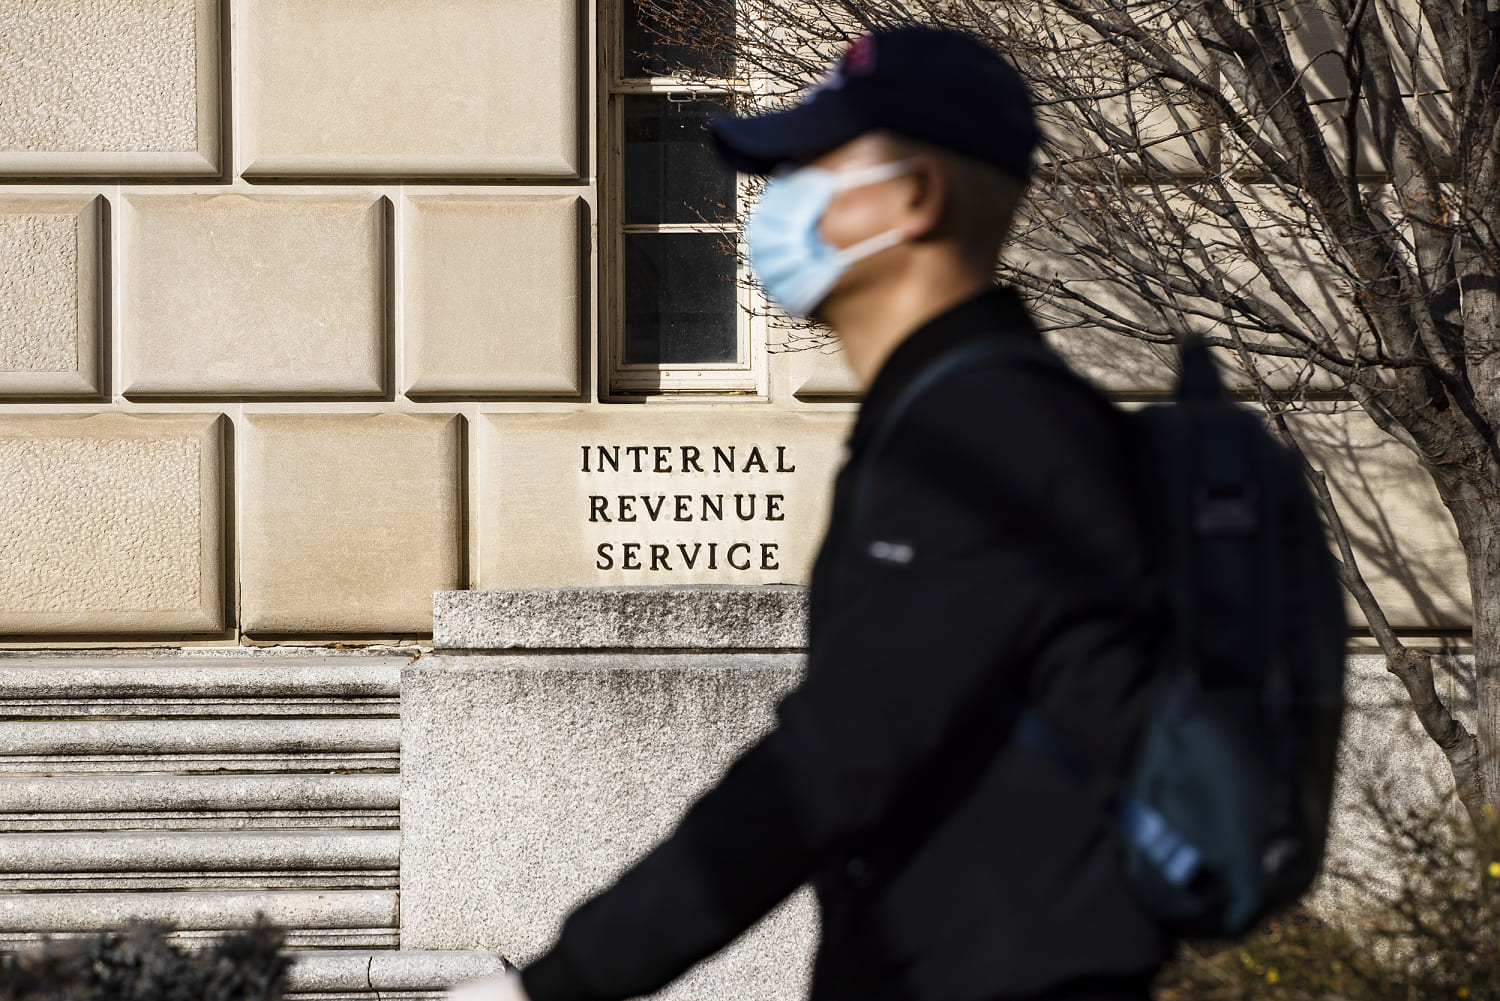 If you faced a tax penalty during the pandemic, the IRS may have a new break for you